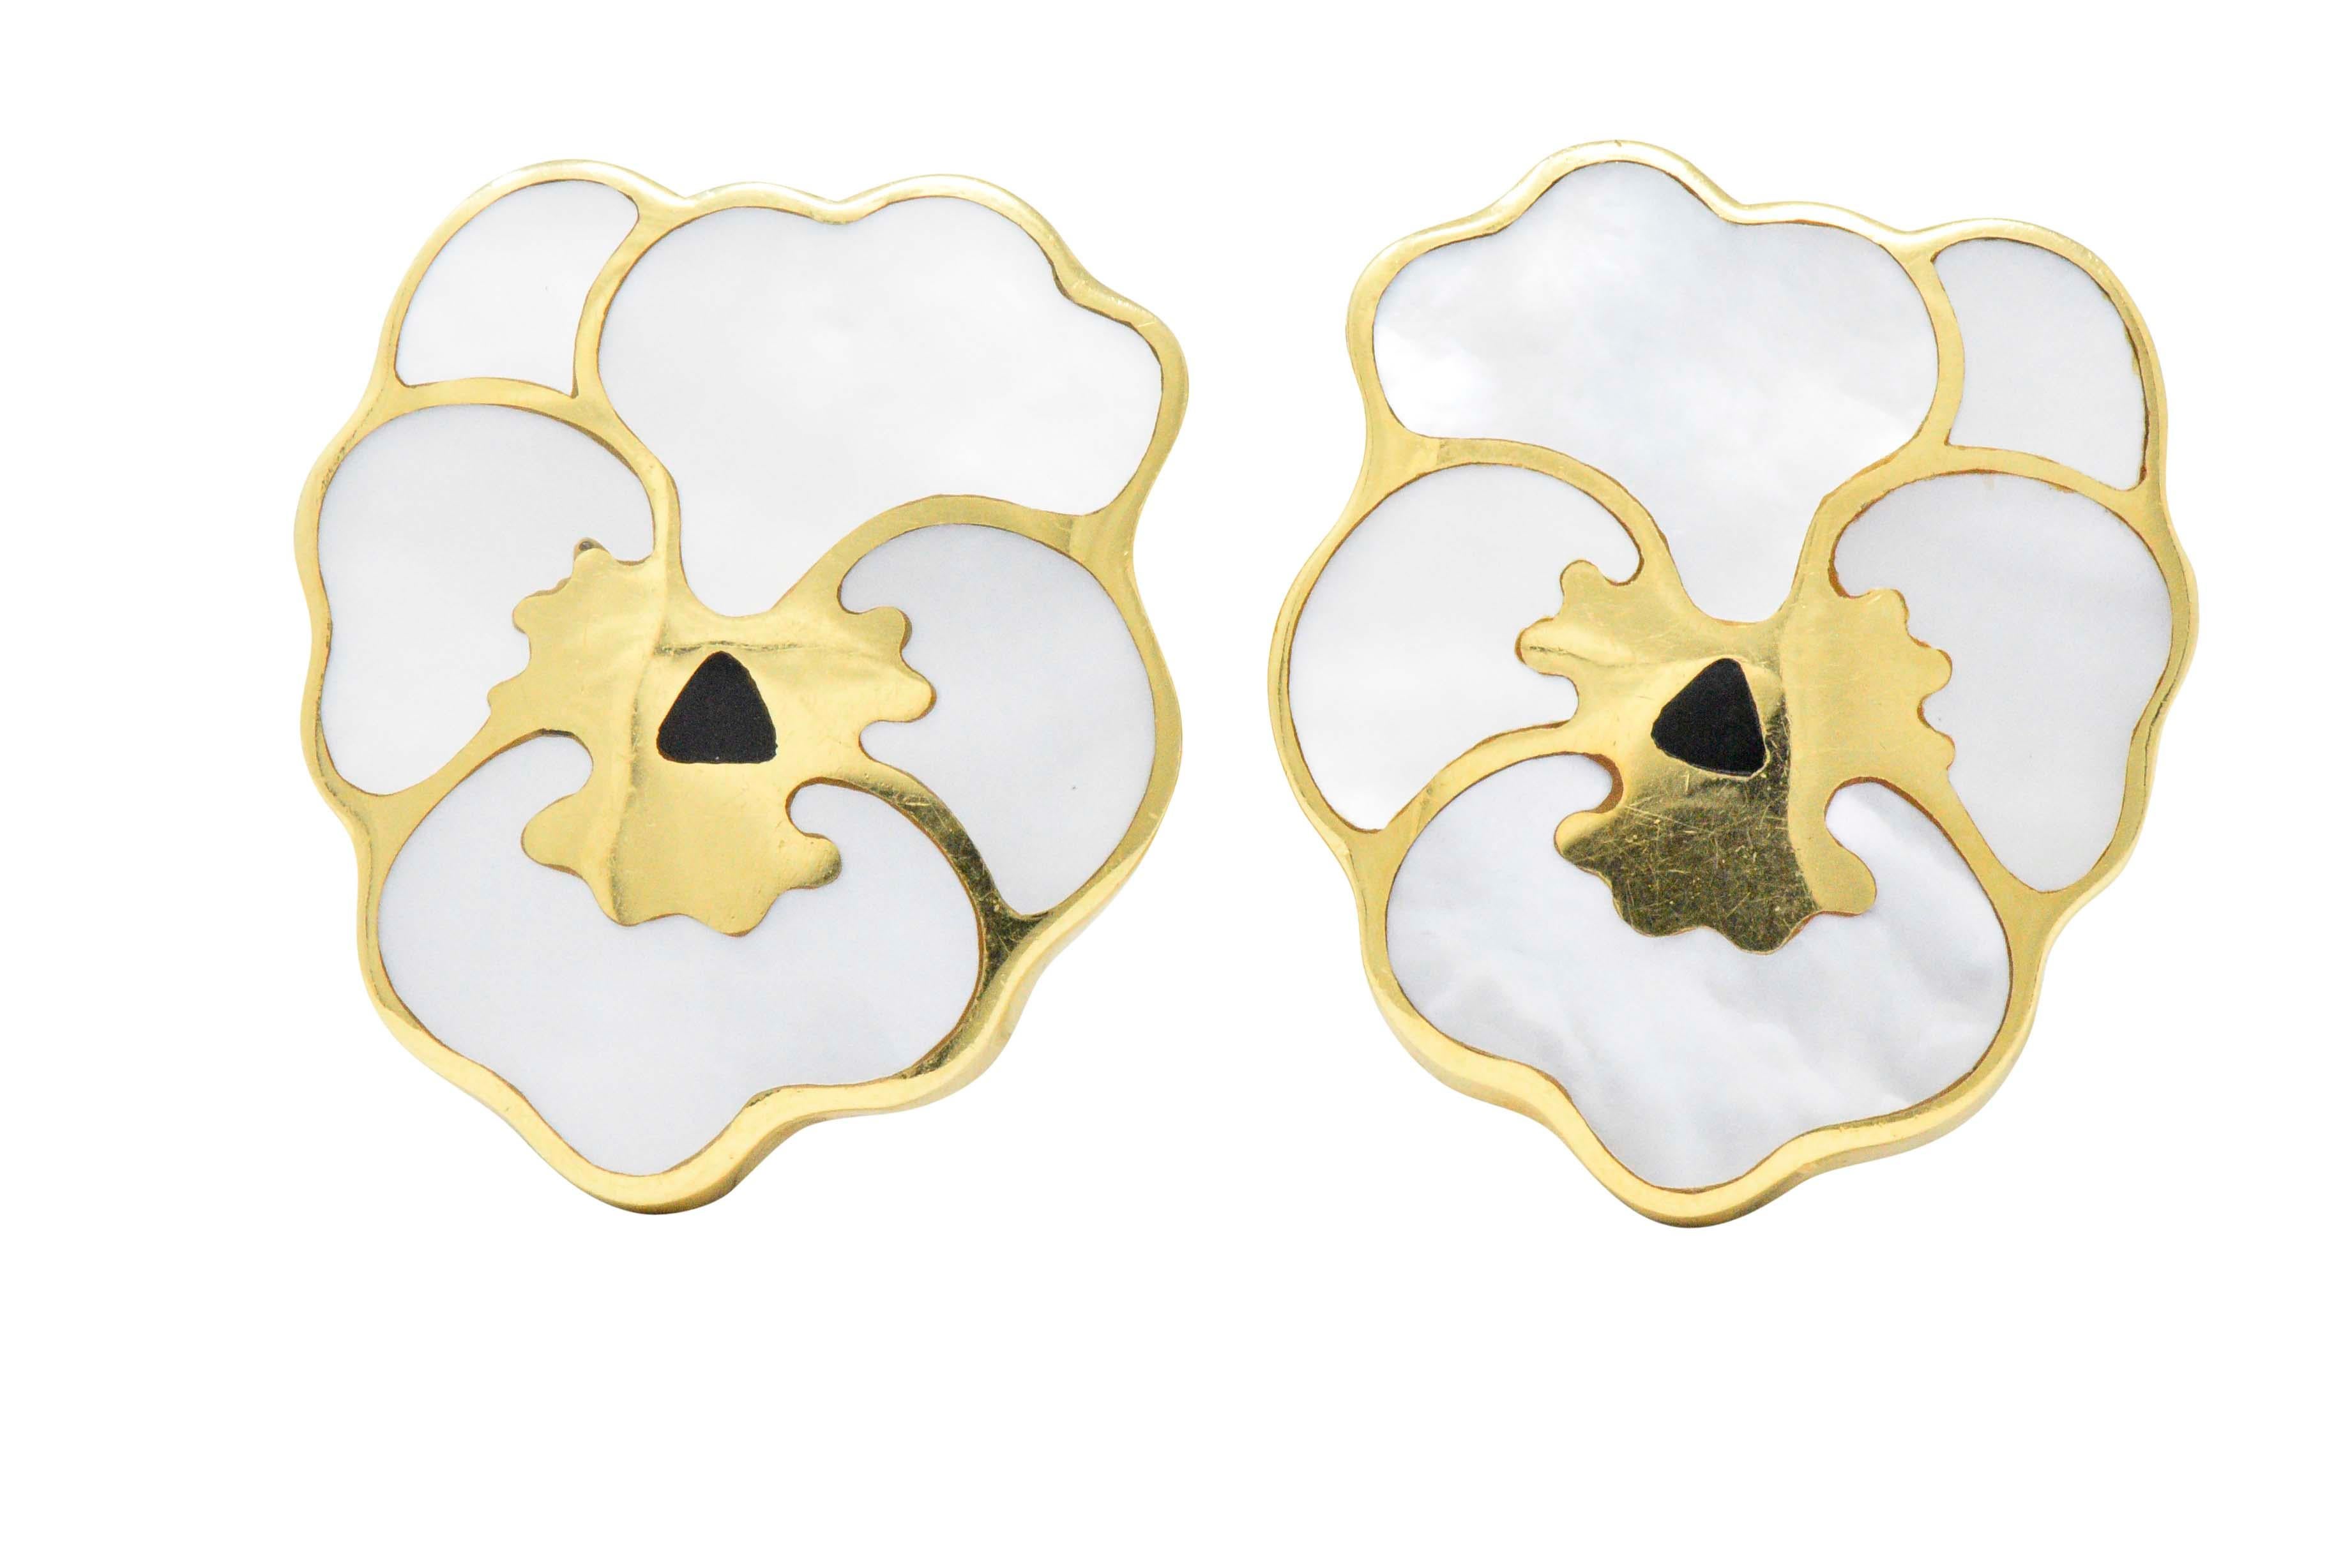 Contemporary Tiffany & Co. Angela Cummings Onyx Mother-of-Pearl 18 Karat Gold Pansy Earrings